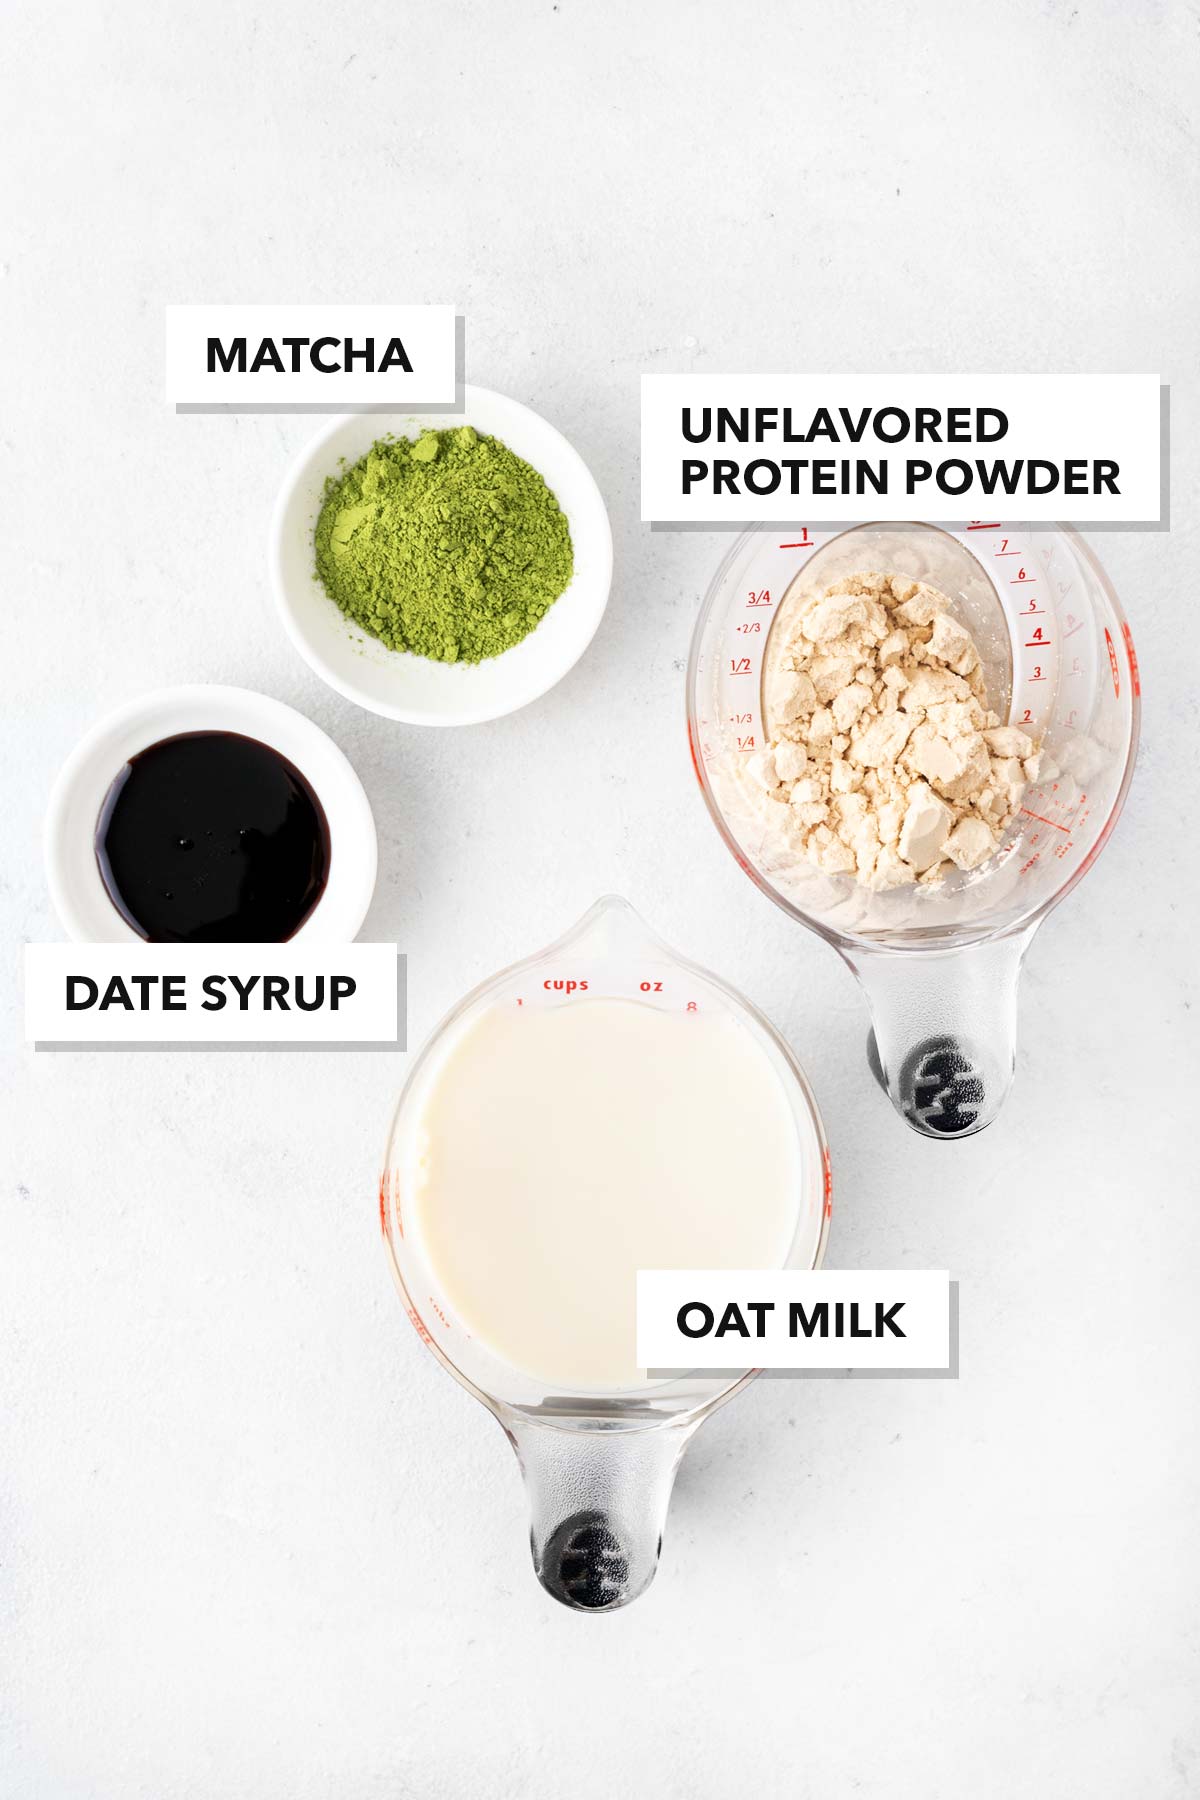 Ingredients for a matcha protein shake.